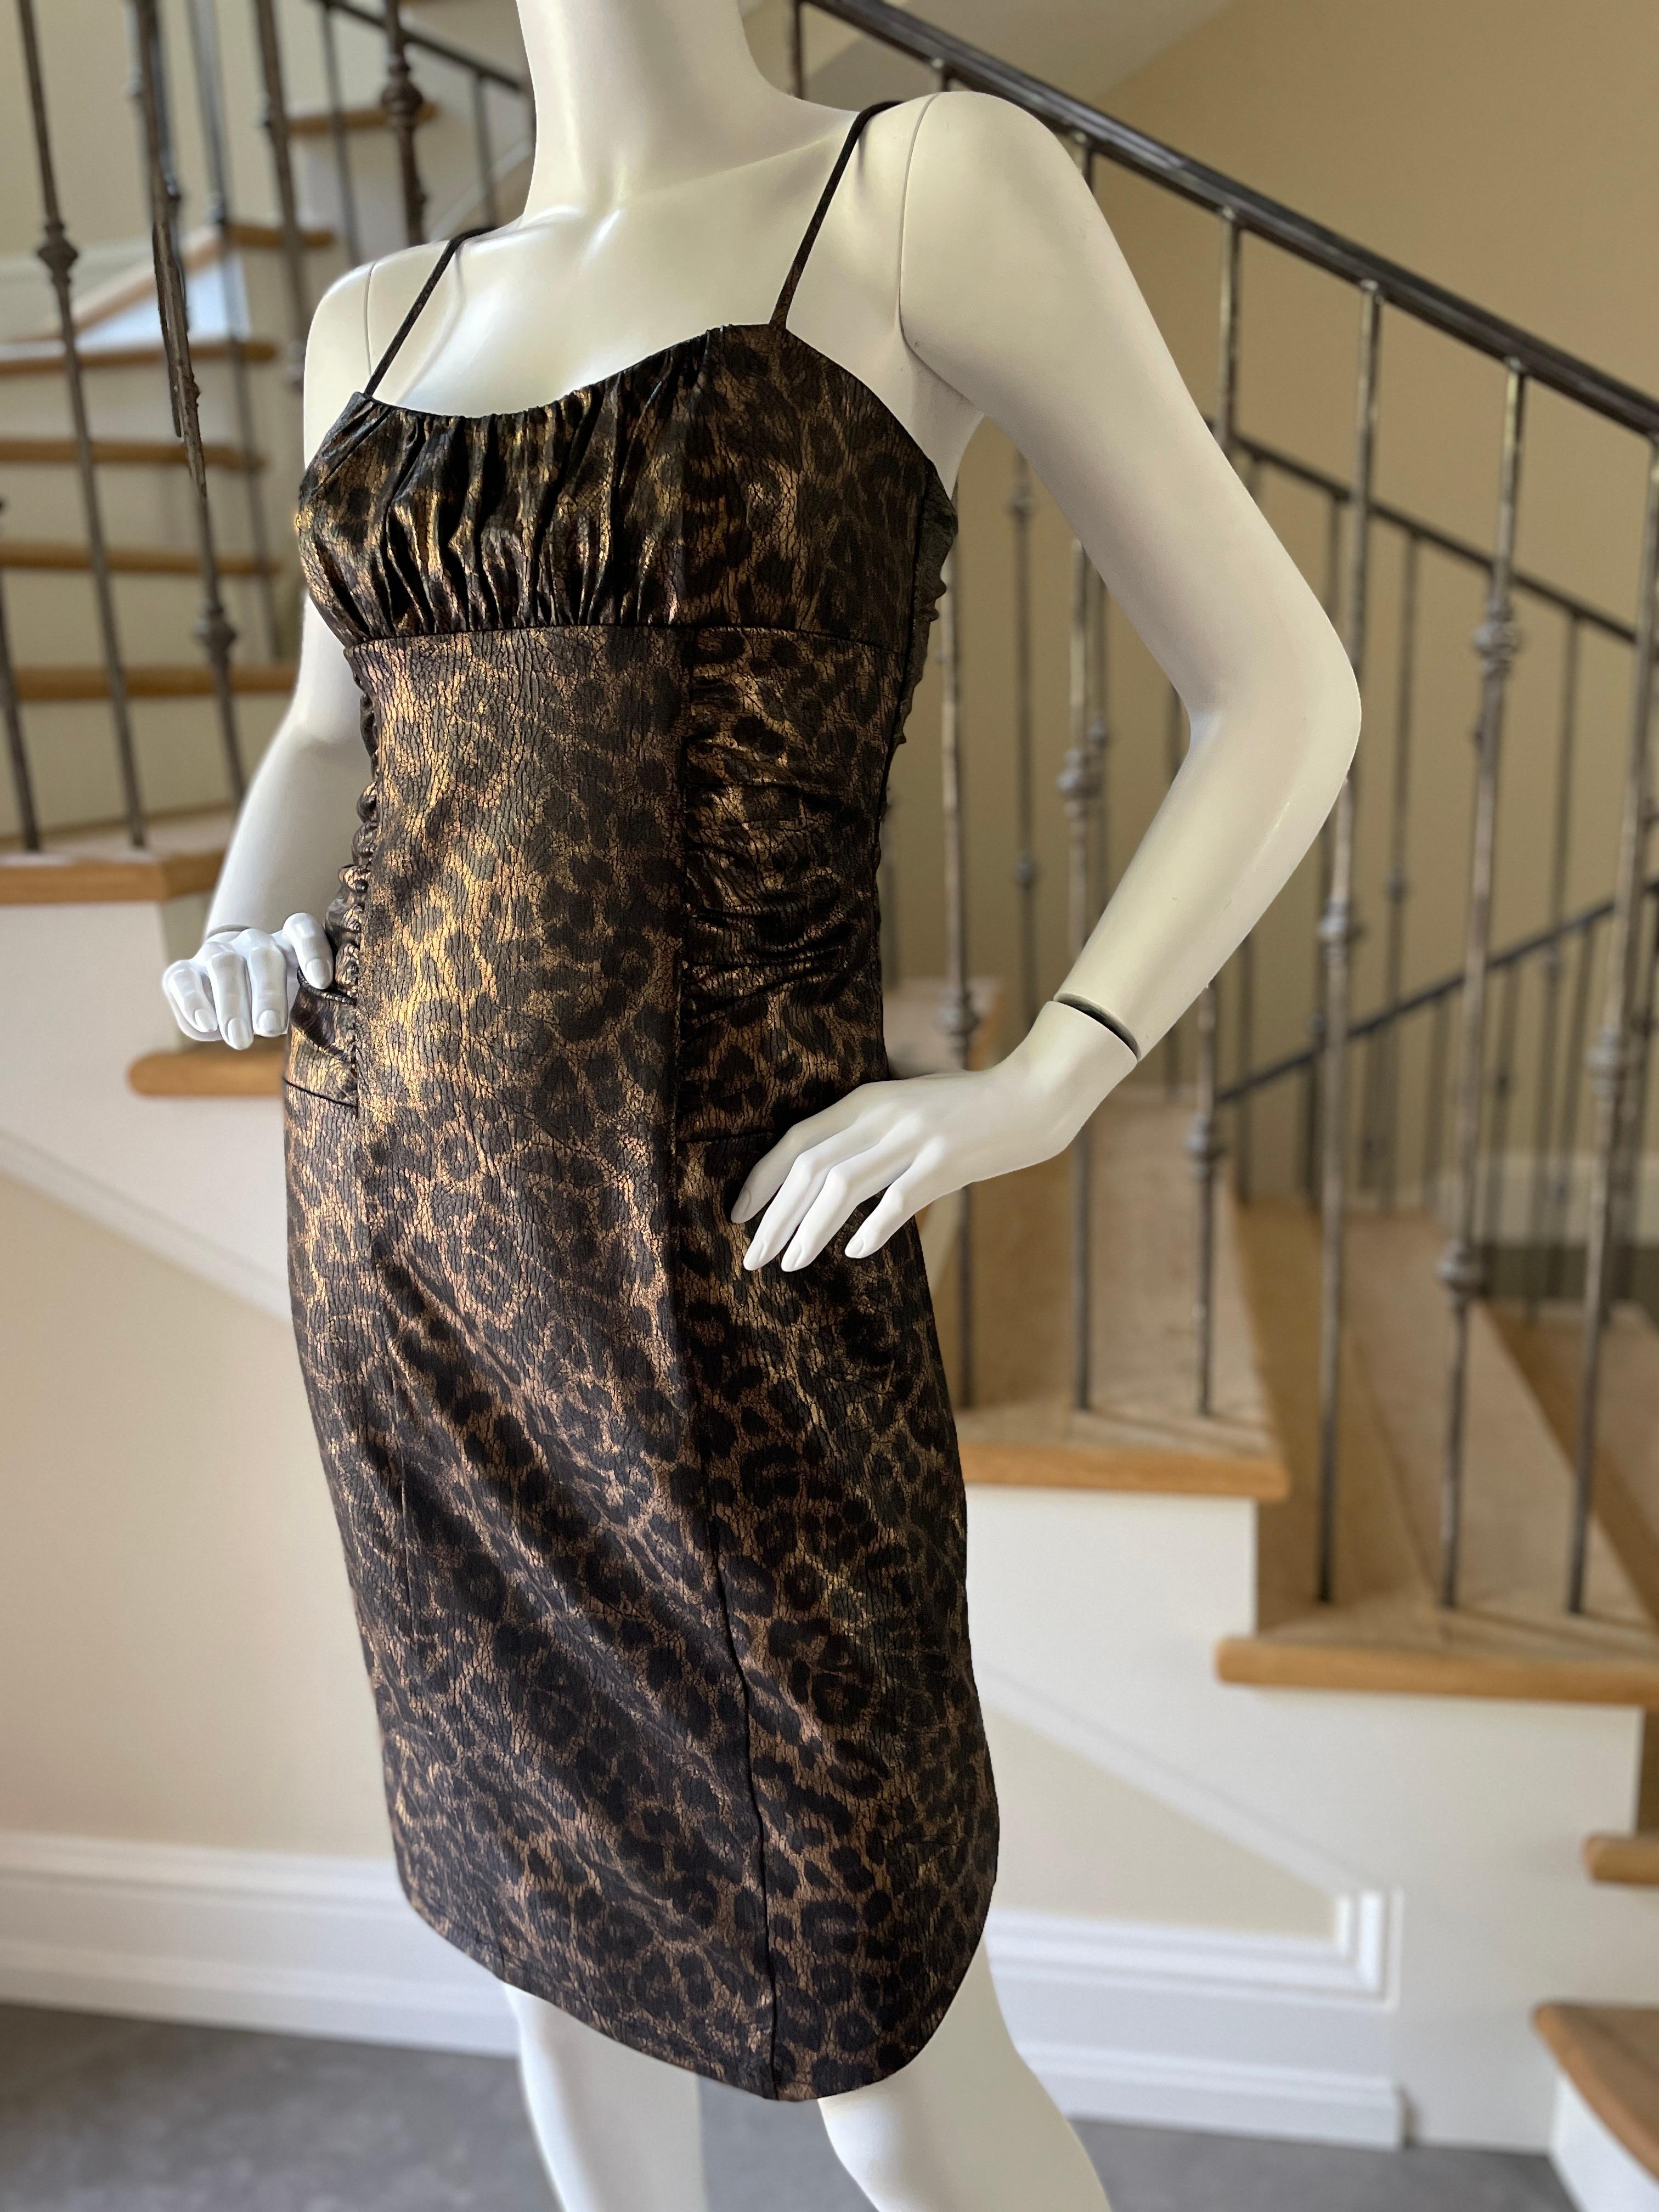 D&G by Dolce & Gabbana Vintage Metallic Bronze Leopard Print Cocktail Dress
 Size 36, but size tag removed.
Lot's of stretch
  Bust 34